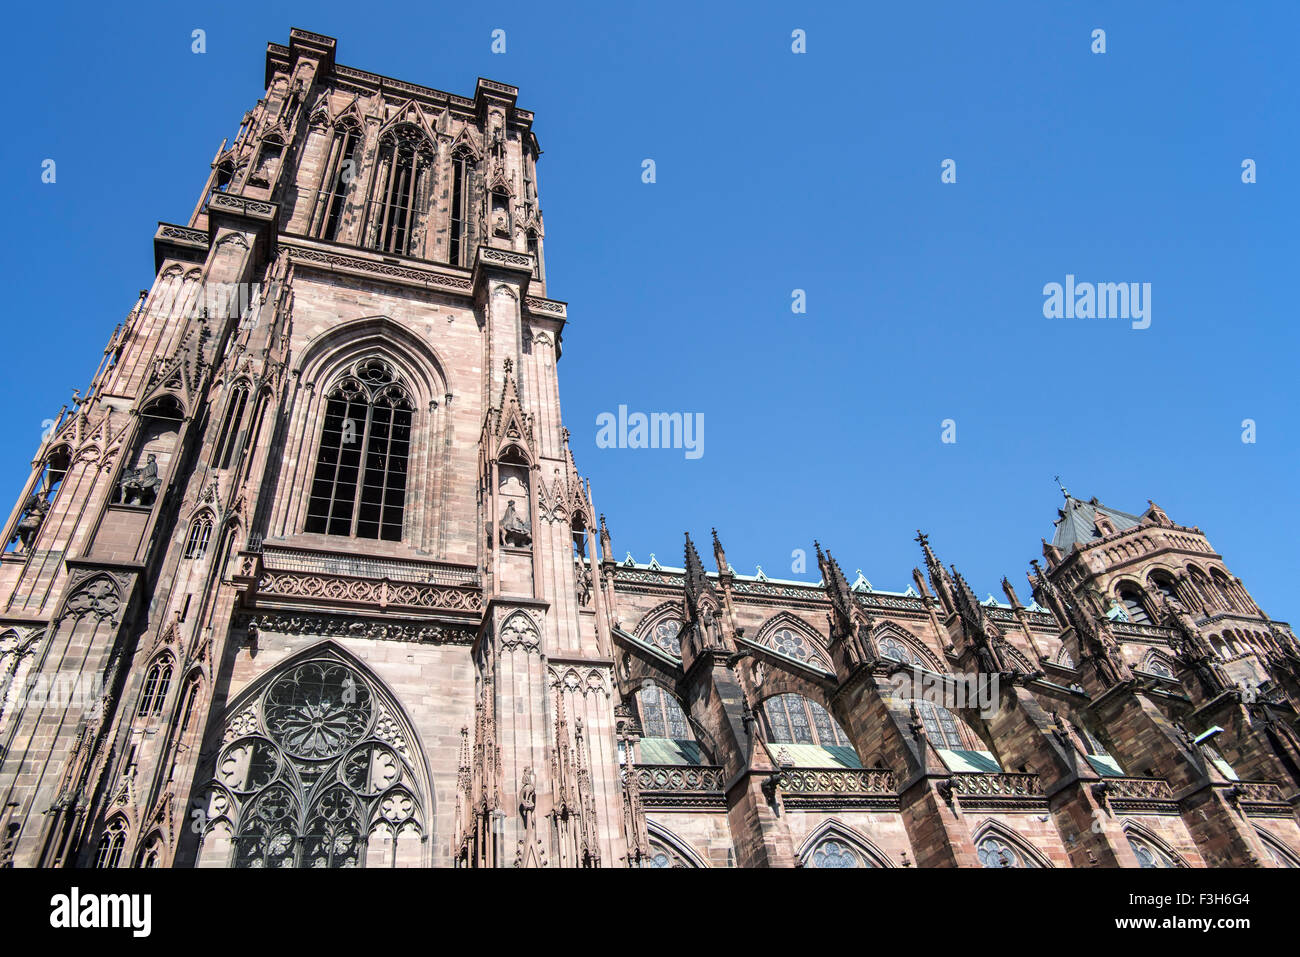 Cathedral of Our Lady of Strasbourg / Cathédrale Notre-Dame de Strasbourg, Alsace, France Stock Photo